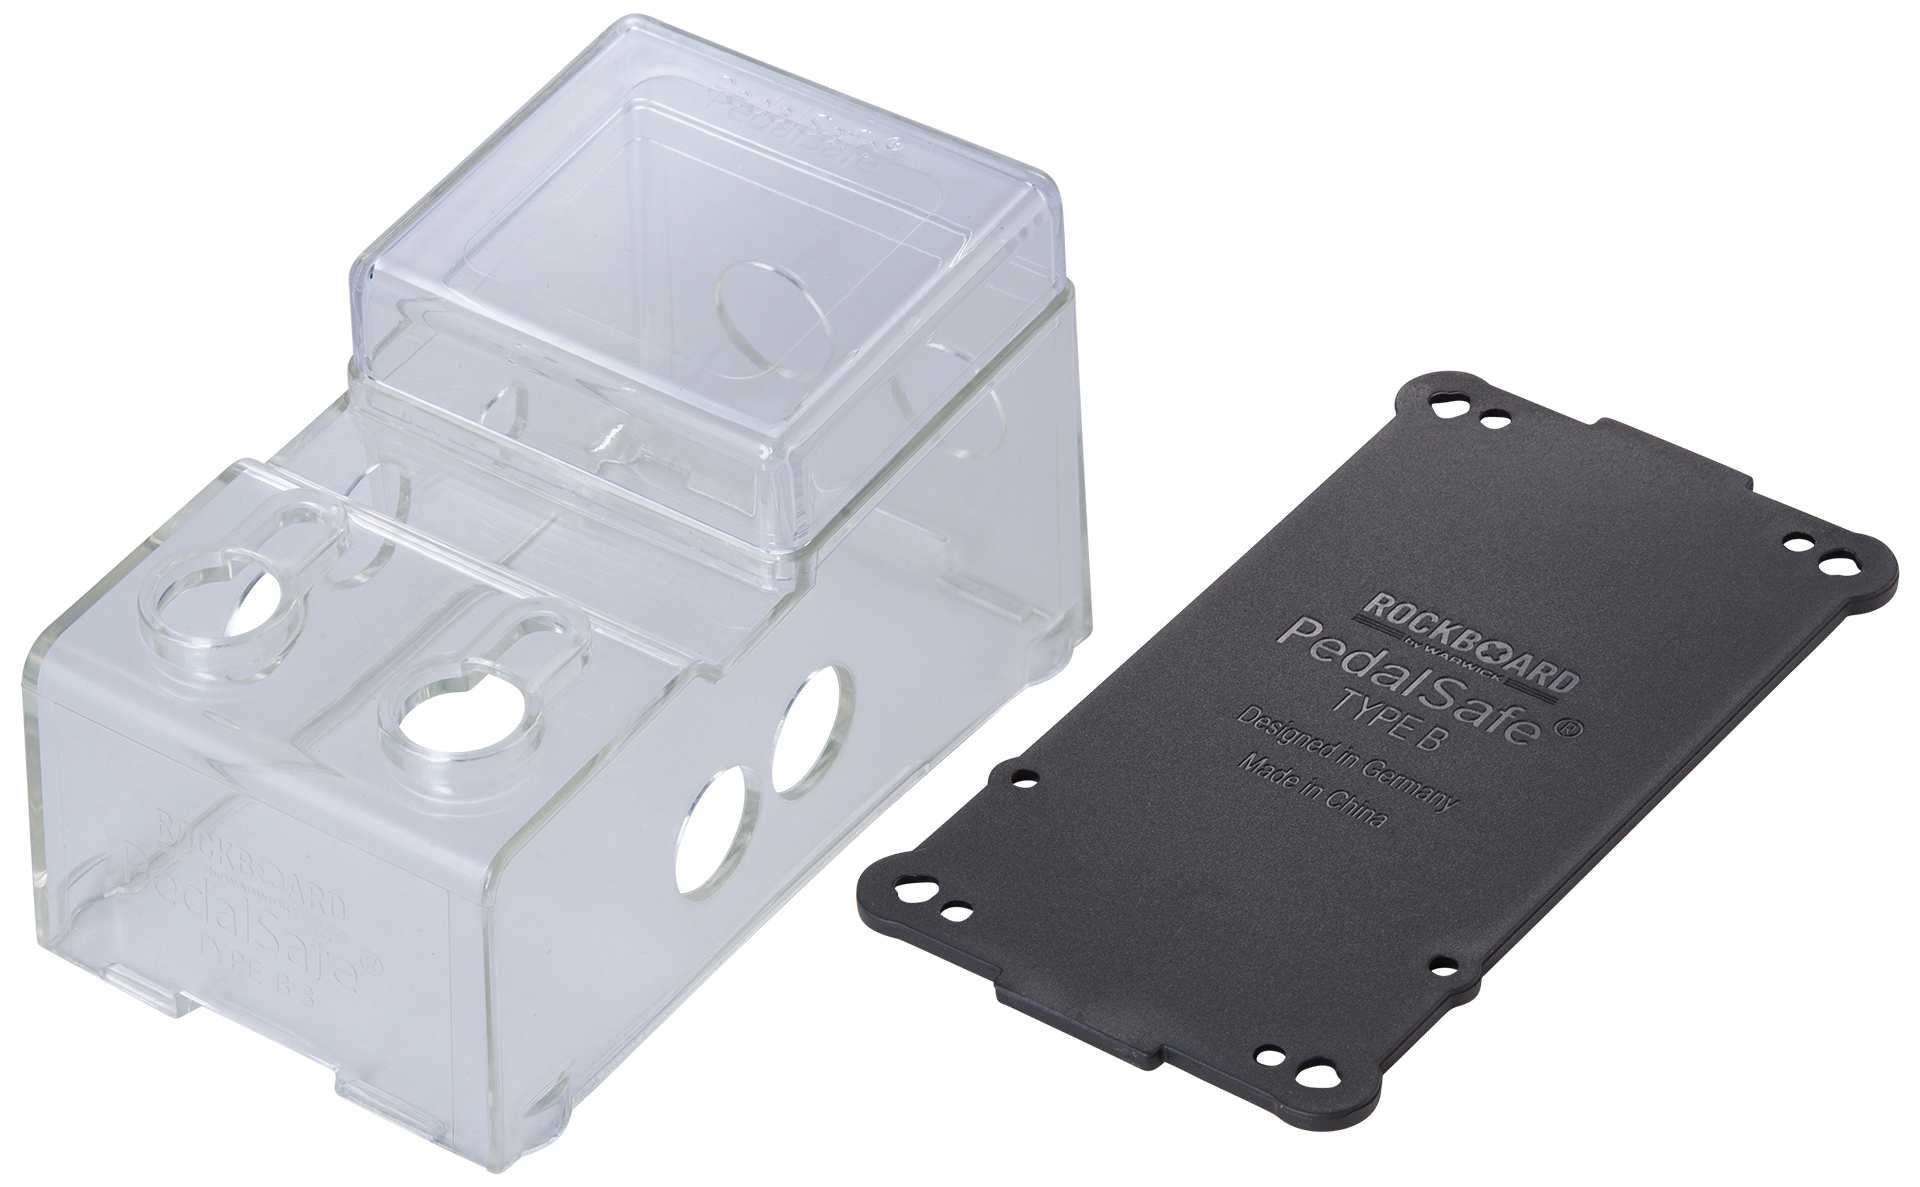 RockBoard PedalSafe Type B3 - Protective Cover and Universal Mounting Plate for WALRUS MAKKO D1 pedals